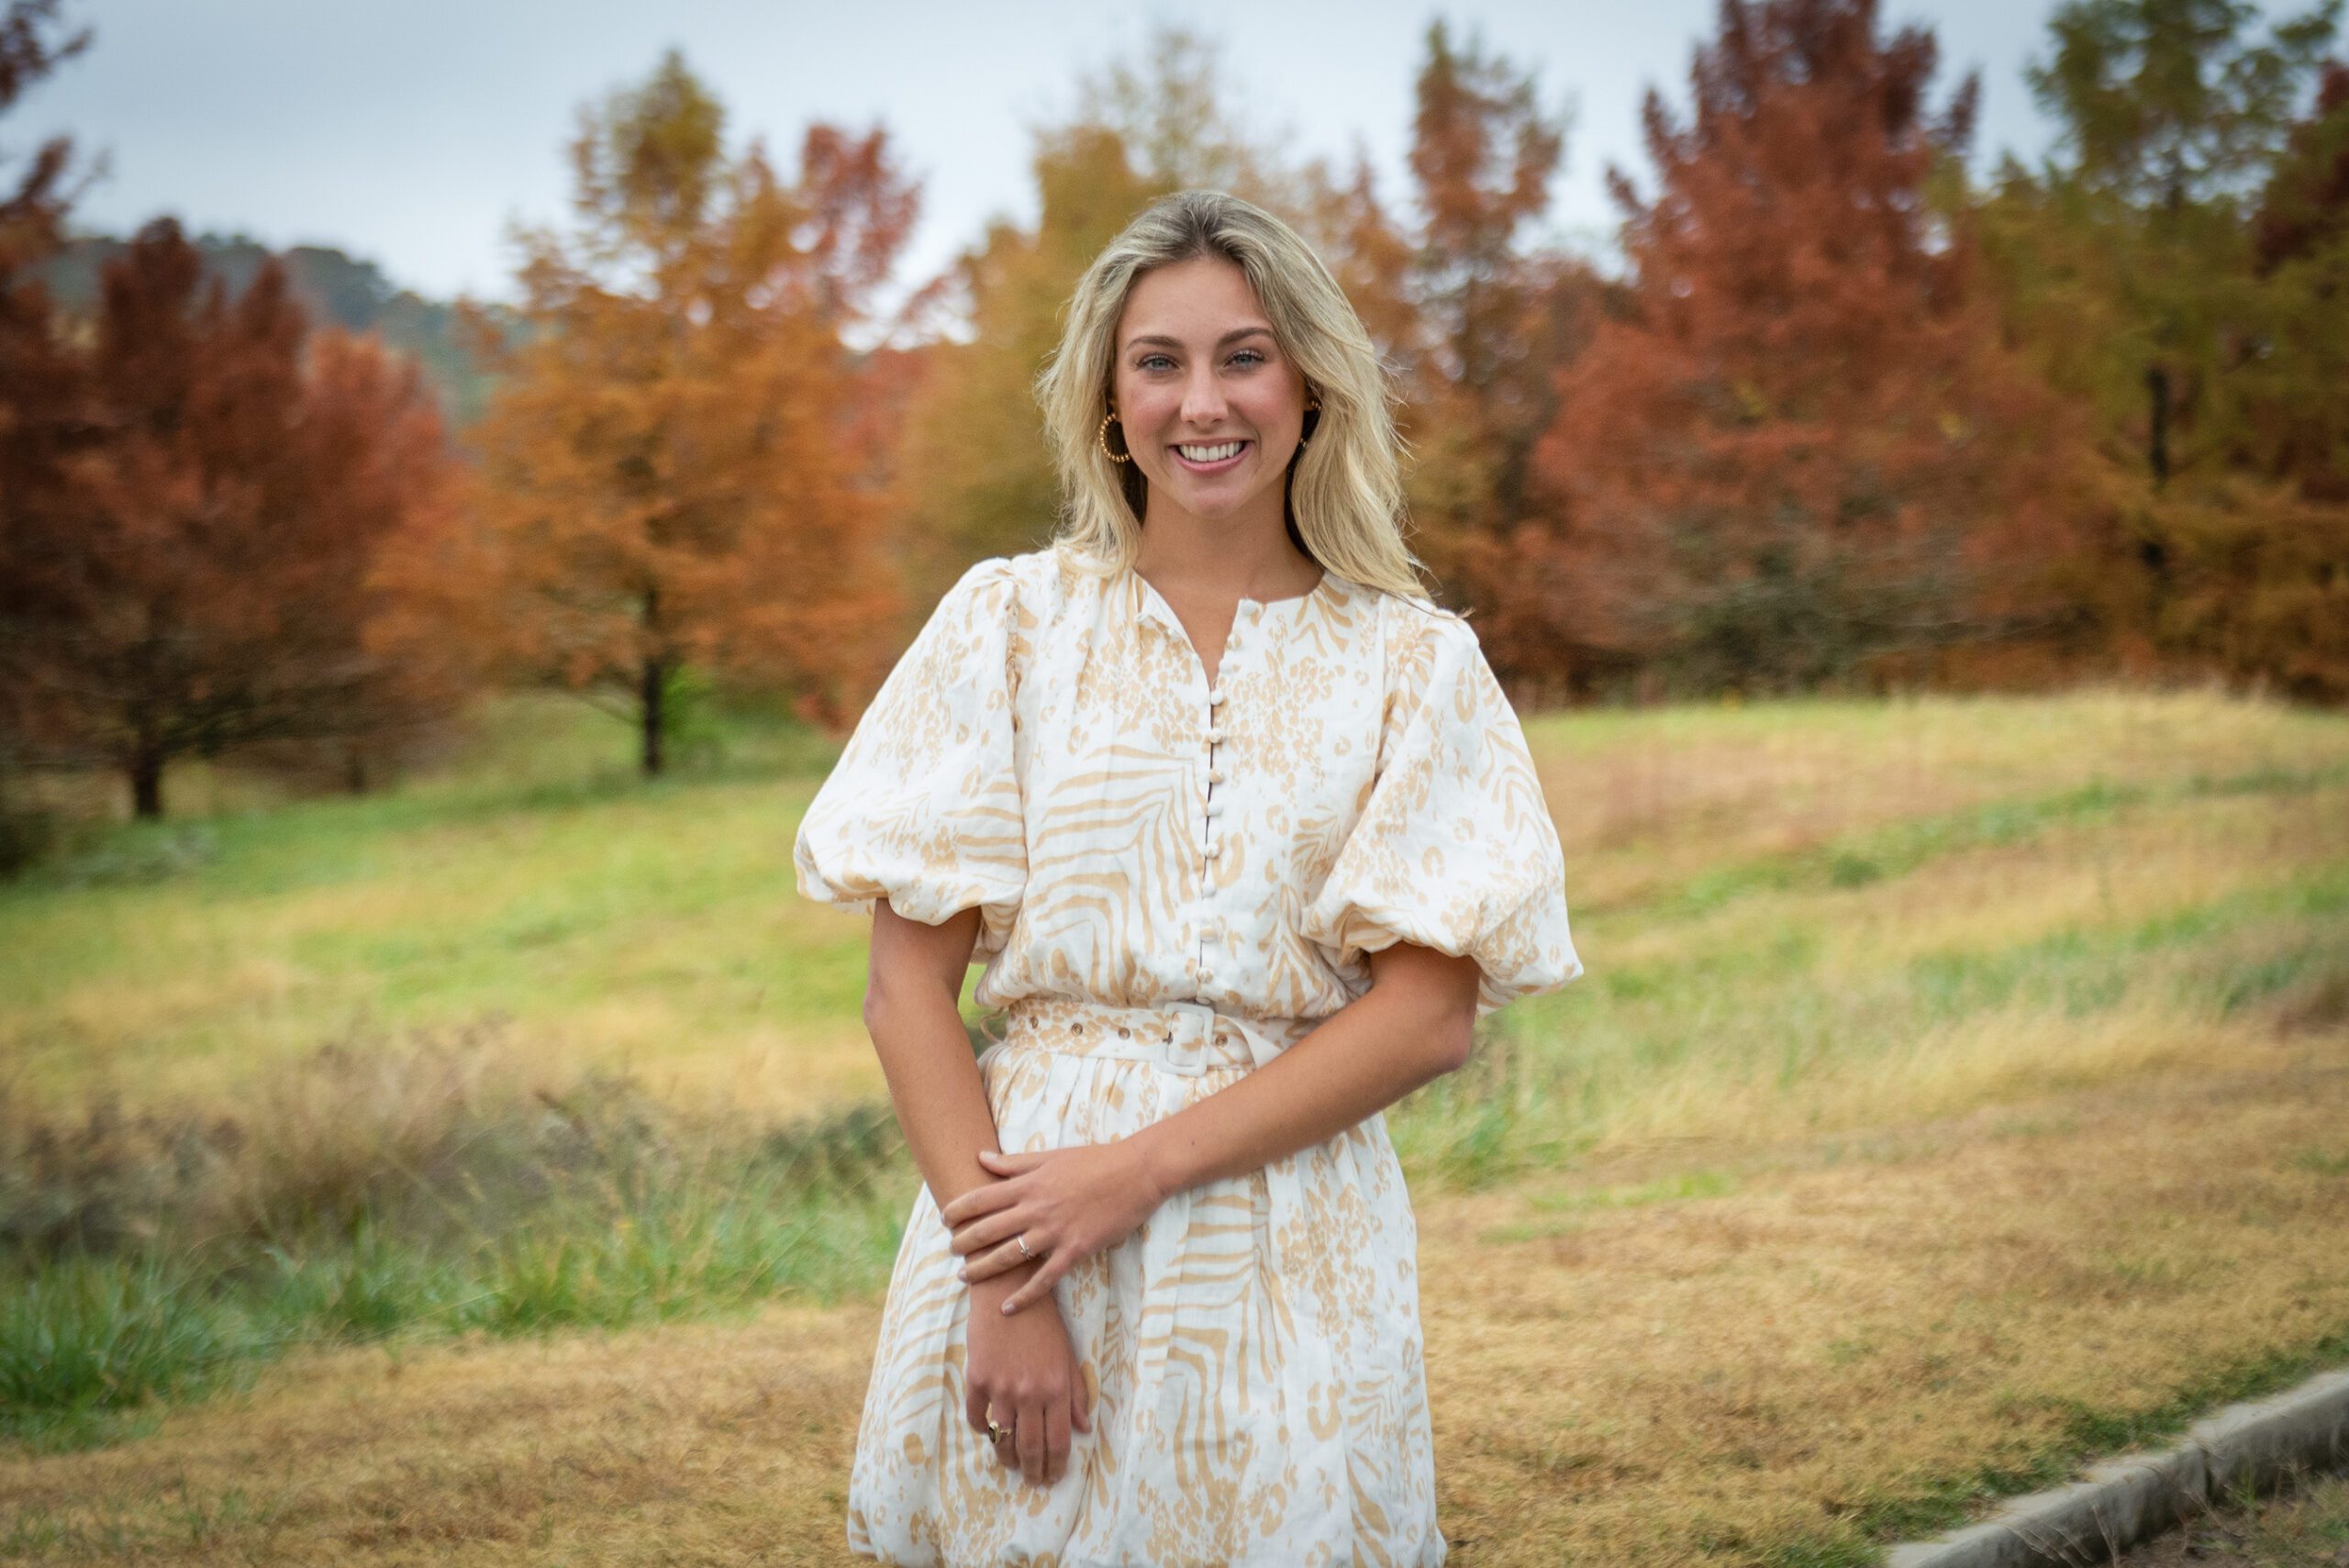 A young lady in a dress stands in a green field with trees full of colorful fall leaves behind her